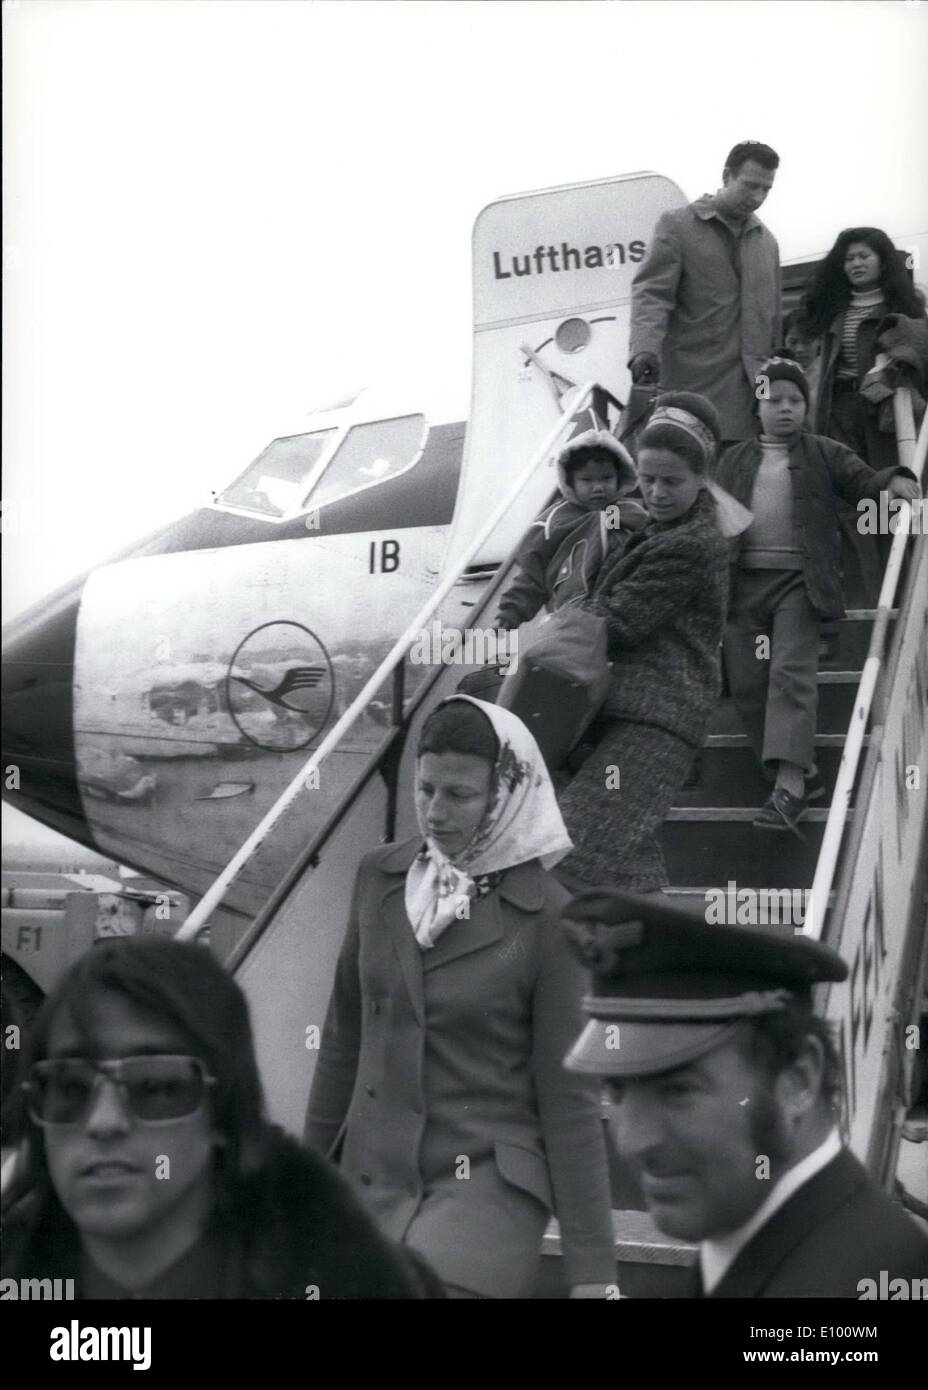 Feb. 02, 1972 - 50 Freed Jumbo Passengers Landed In Munich: Very tired and still a bit frightened 37 women and 12 children and one man who were passengers on a Jumbo Jet which was hijacked 30 hours earlier on a flight to Aden, climbed out of a Boeing 727 at Munich Airport. The special plane with the freed men arrived in frankfurt the same evening. Photo shows the first passengers of the hijacked Jumbo-Jet climbing out of the plane which brought them to Germany. Stock Photo